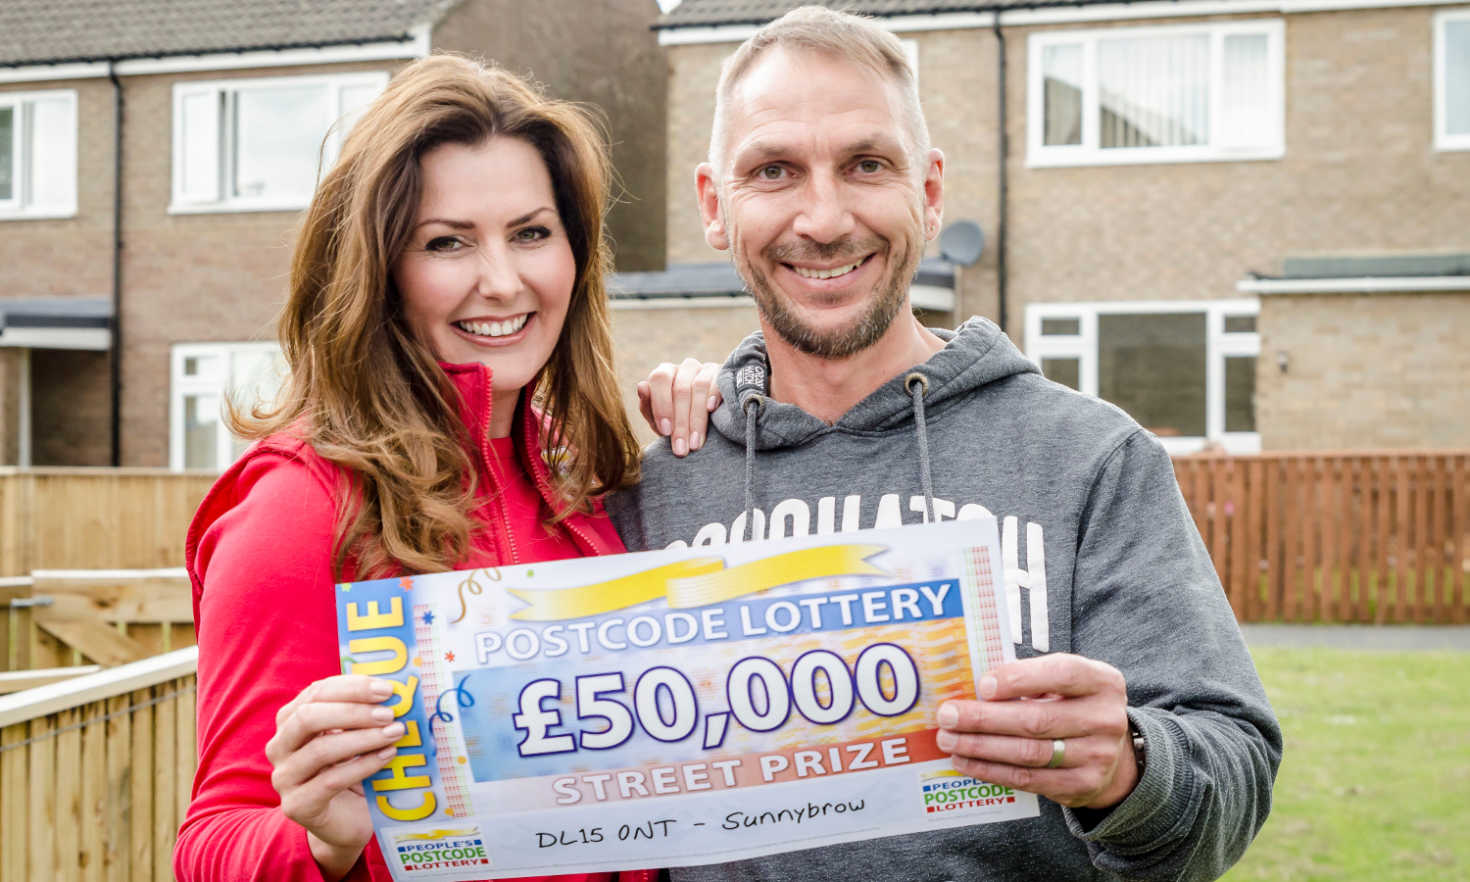 Sunnybrow player Richard Rowell is overjoyed with his £50,000 win